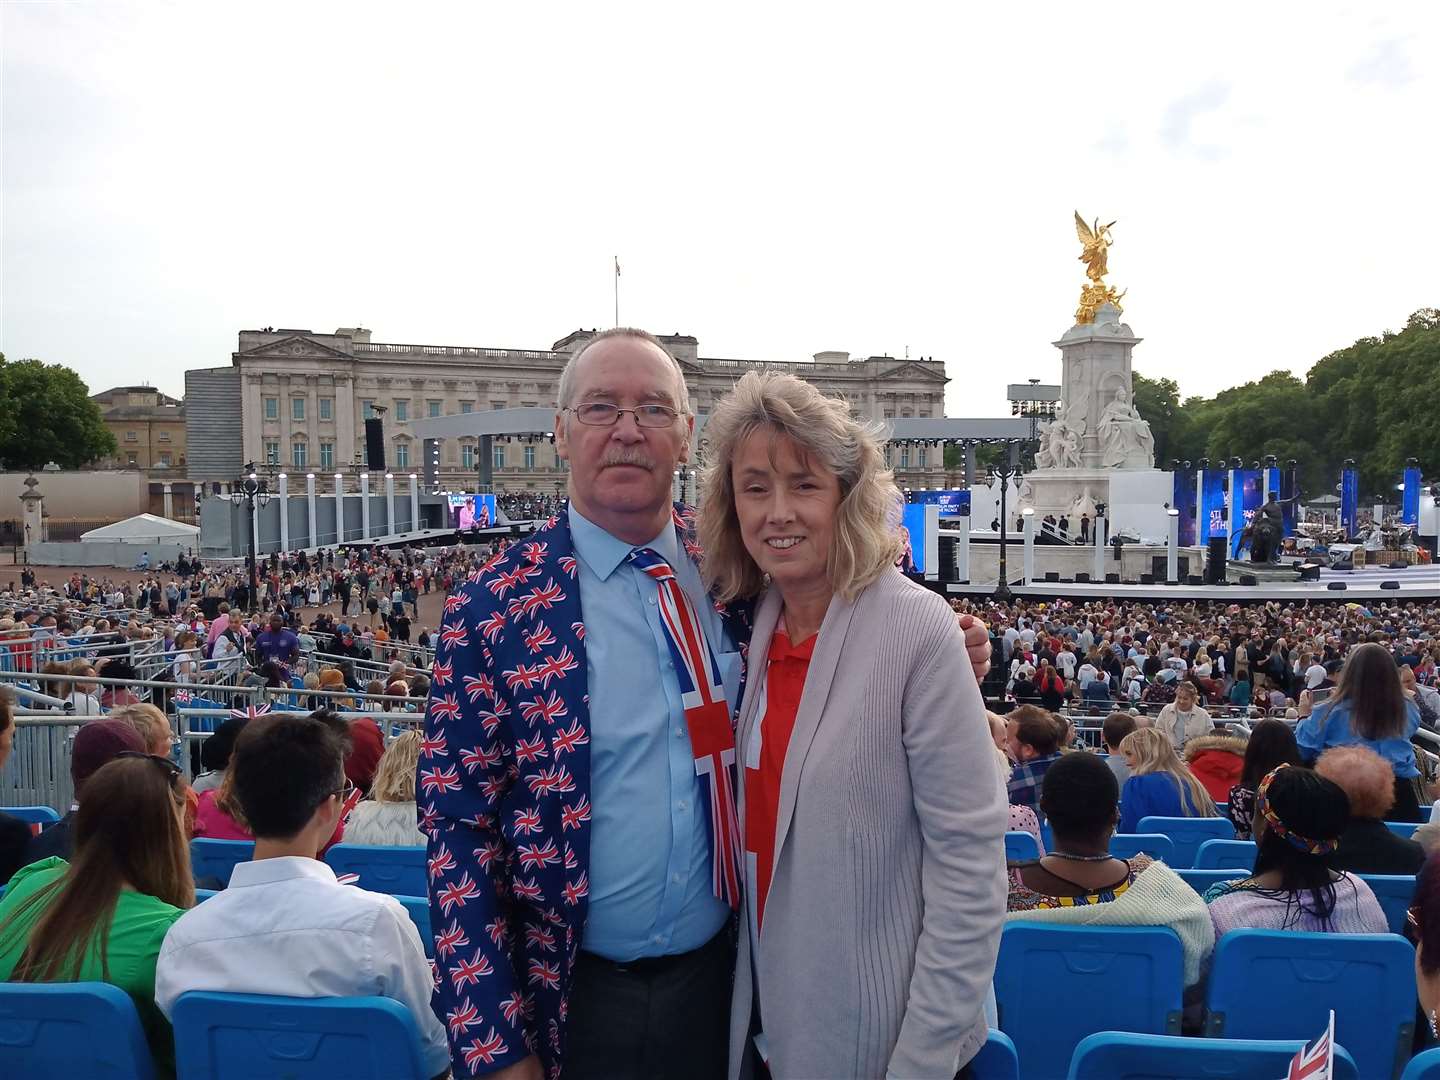 Stewart Kitching from Sittingbourne and his partner Janet Avery outside Buckingham Palace (57147886)